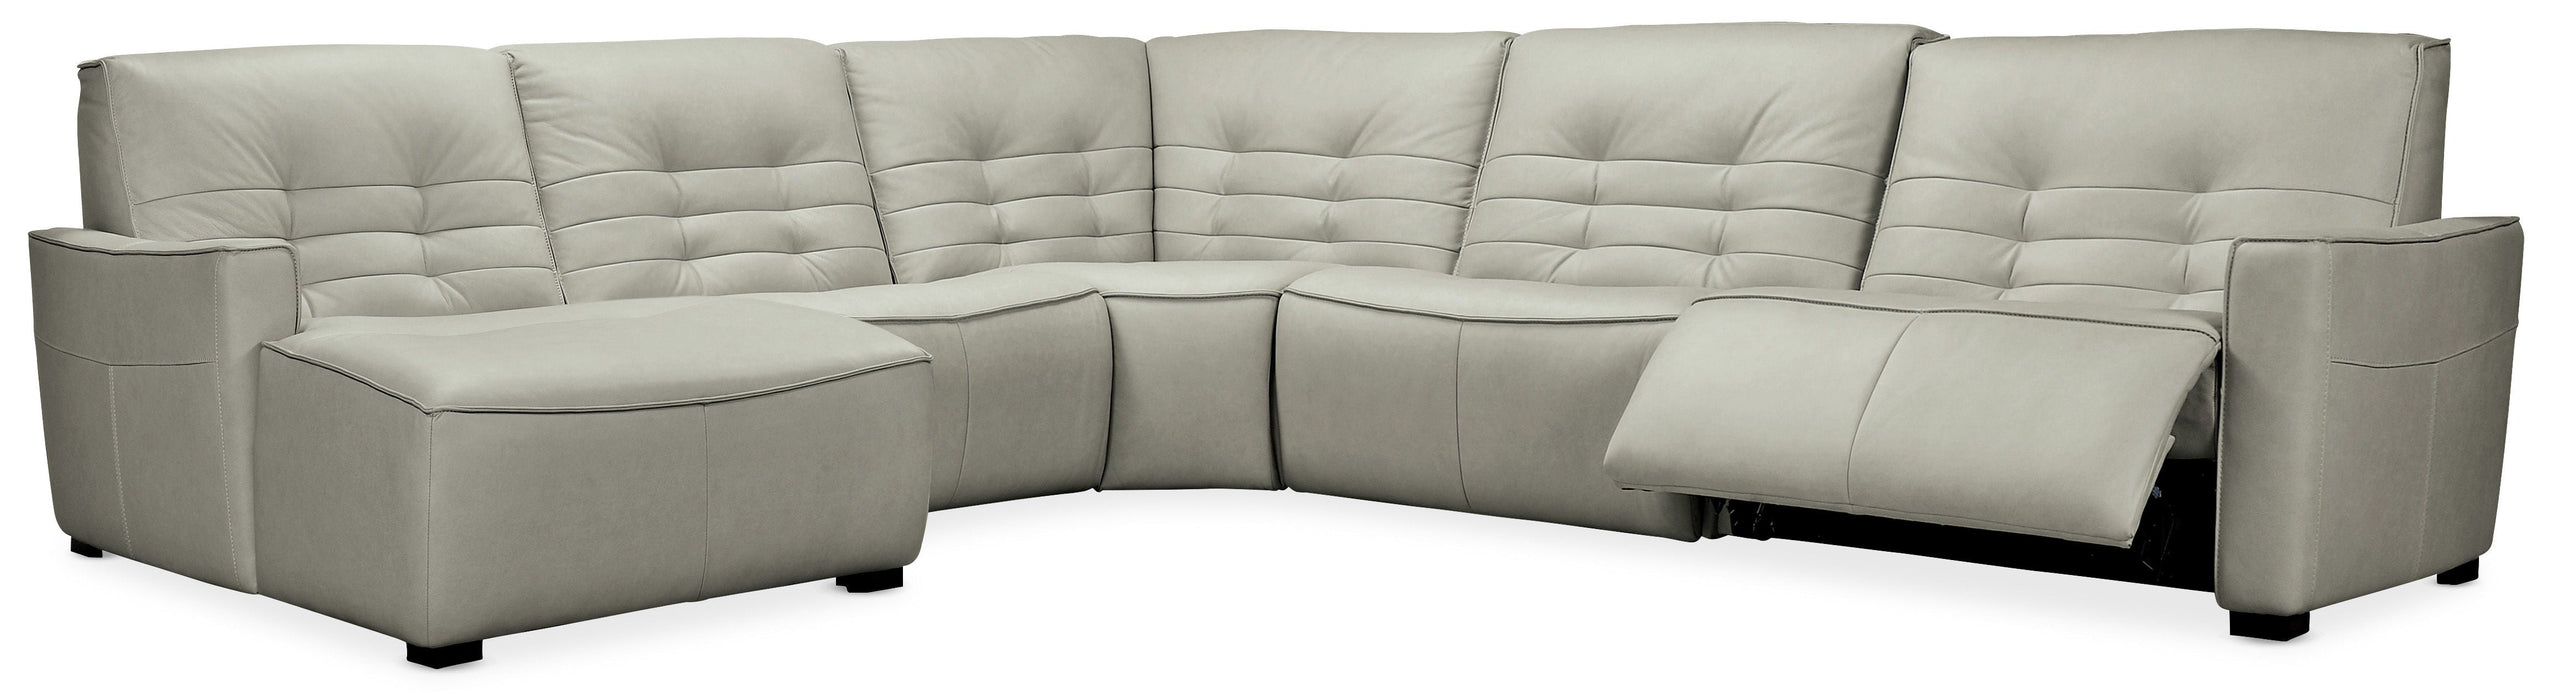 Reaux 5-Piece LAF Chaise Sectional With 2 Power Recliners